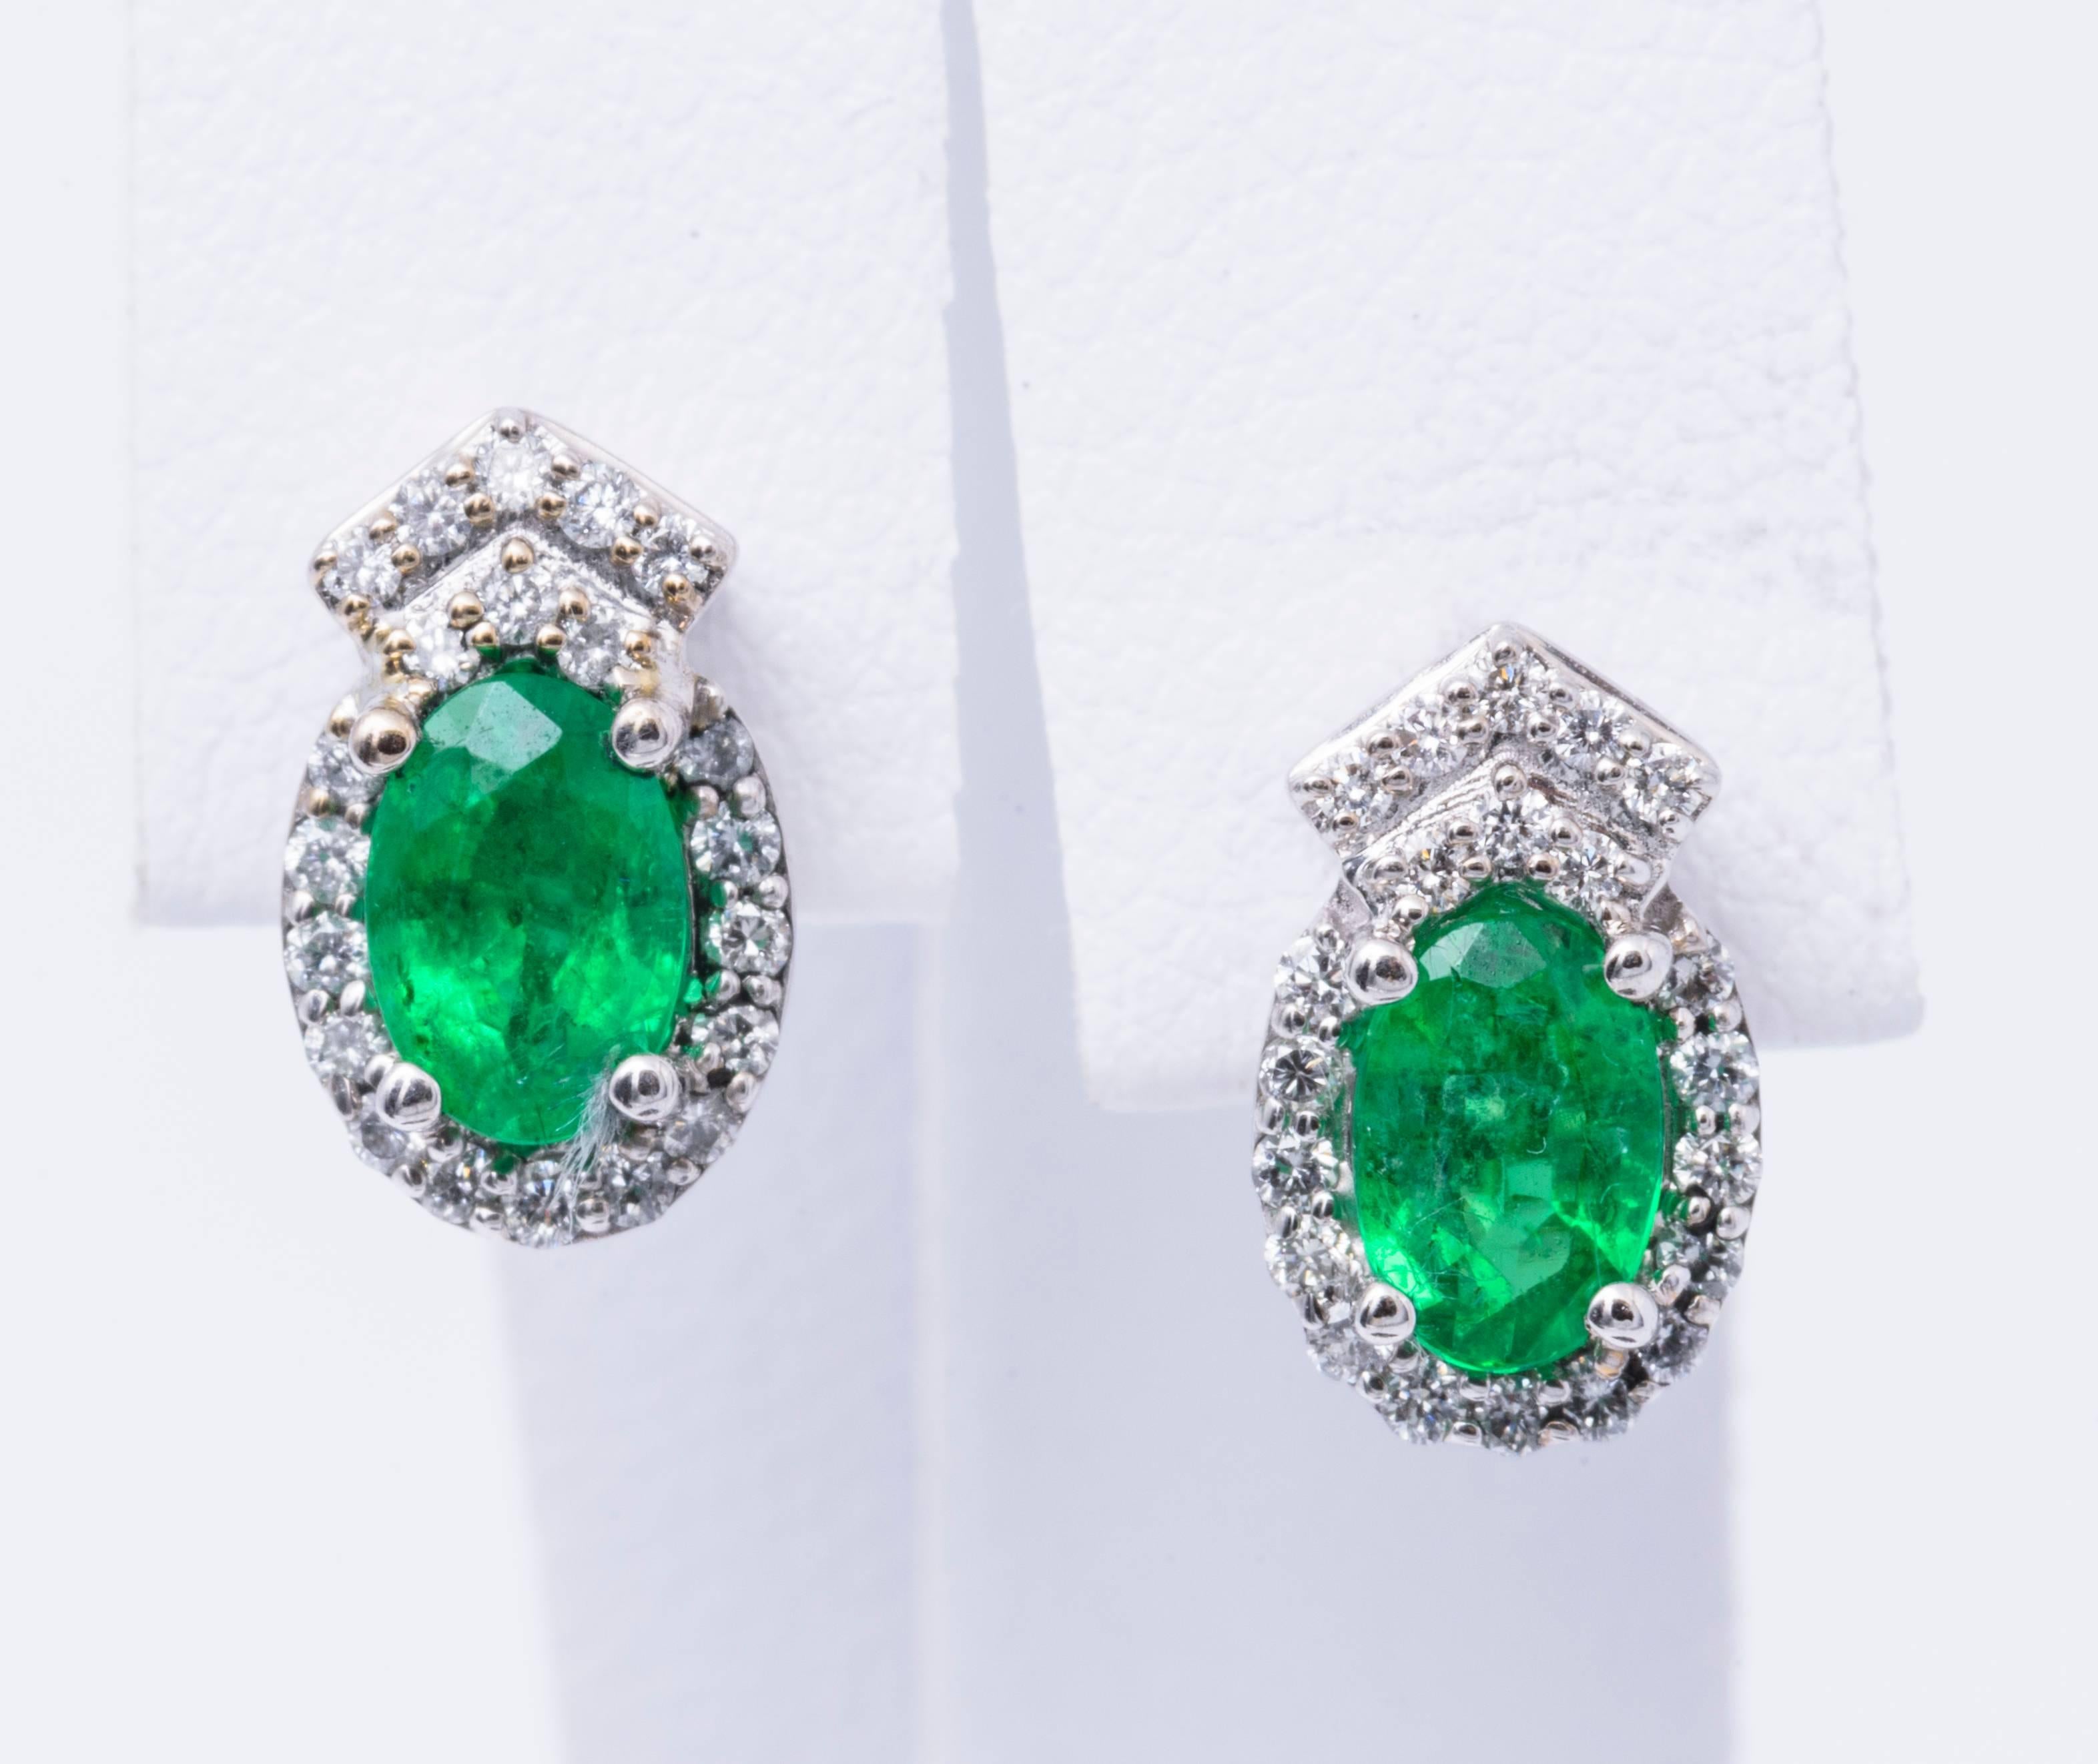 14K White Gold
6 x 4 mm Oval shape Emeralds 0.82 Carats
1.1 X 6 mm Earrings
Diamonds 0.22 Cts
All our gemstone are genuine and are sourced with the higher degree of integrity